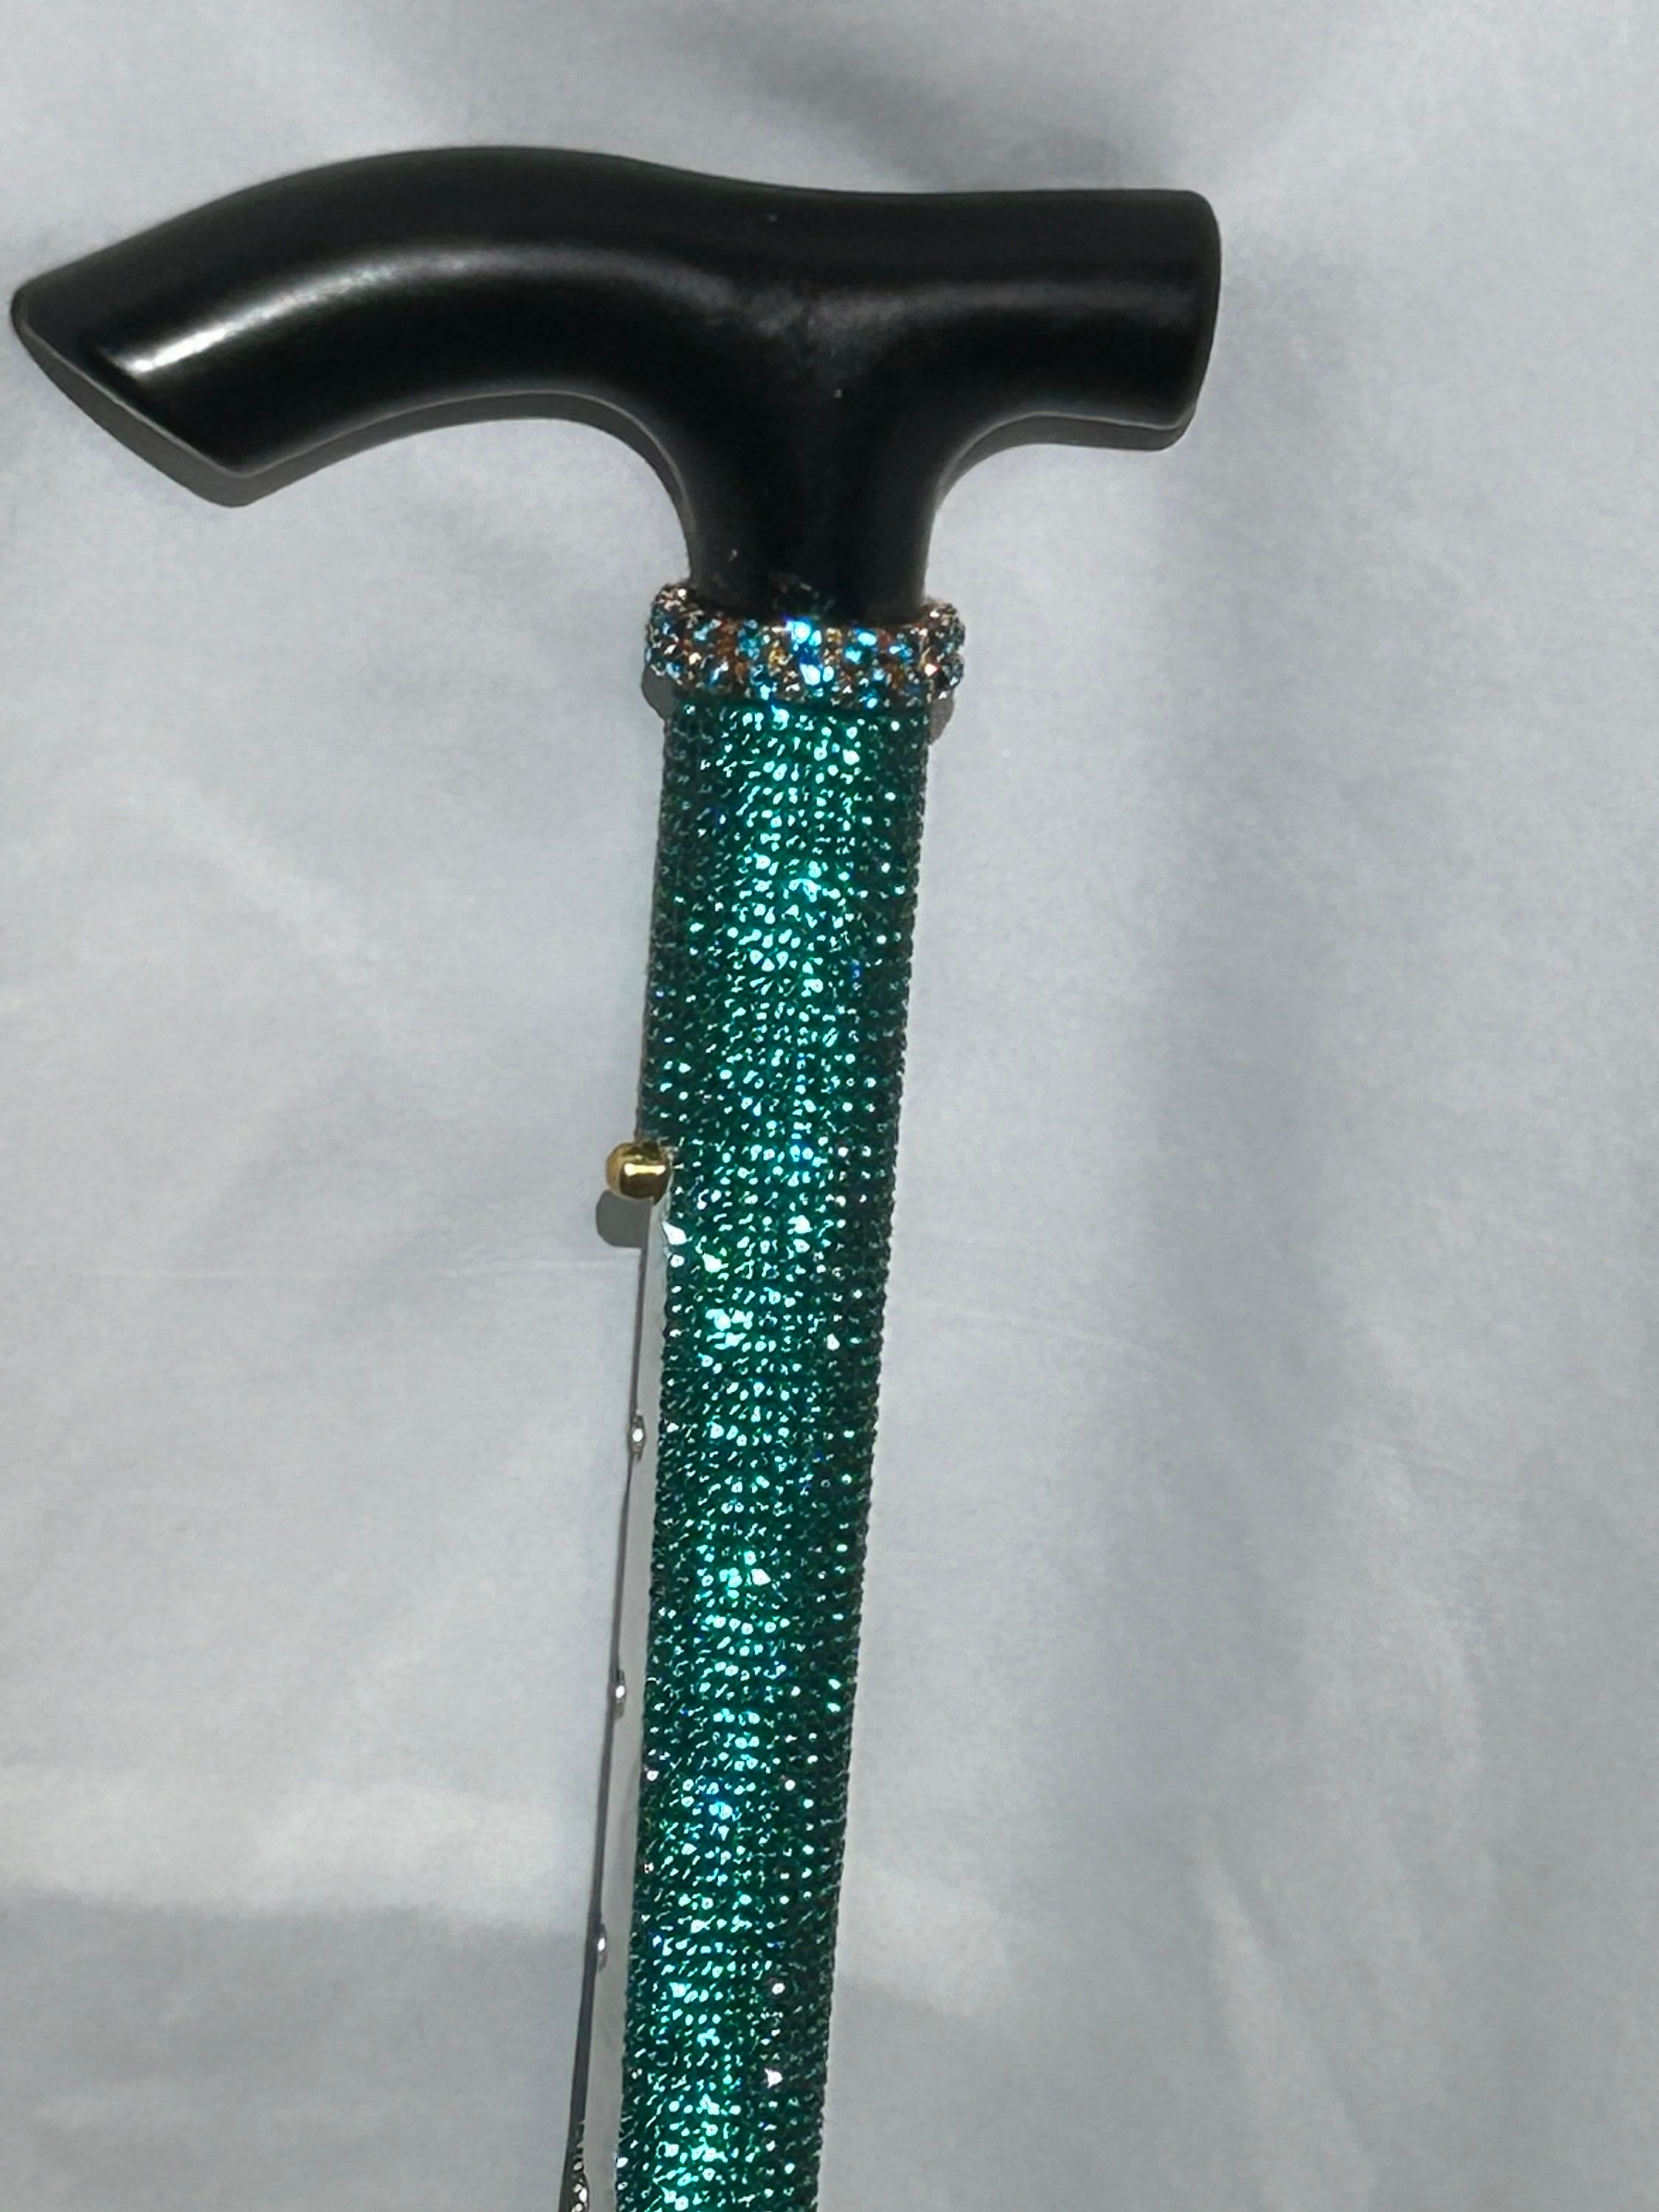 Pink Aurora or Turquoise Rhinestone Cane, Fabulous Retirement or Post  Surgery Gift, Folding Light Weight Walking Stick for MS Balance Issues 